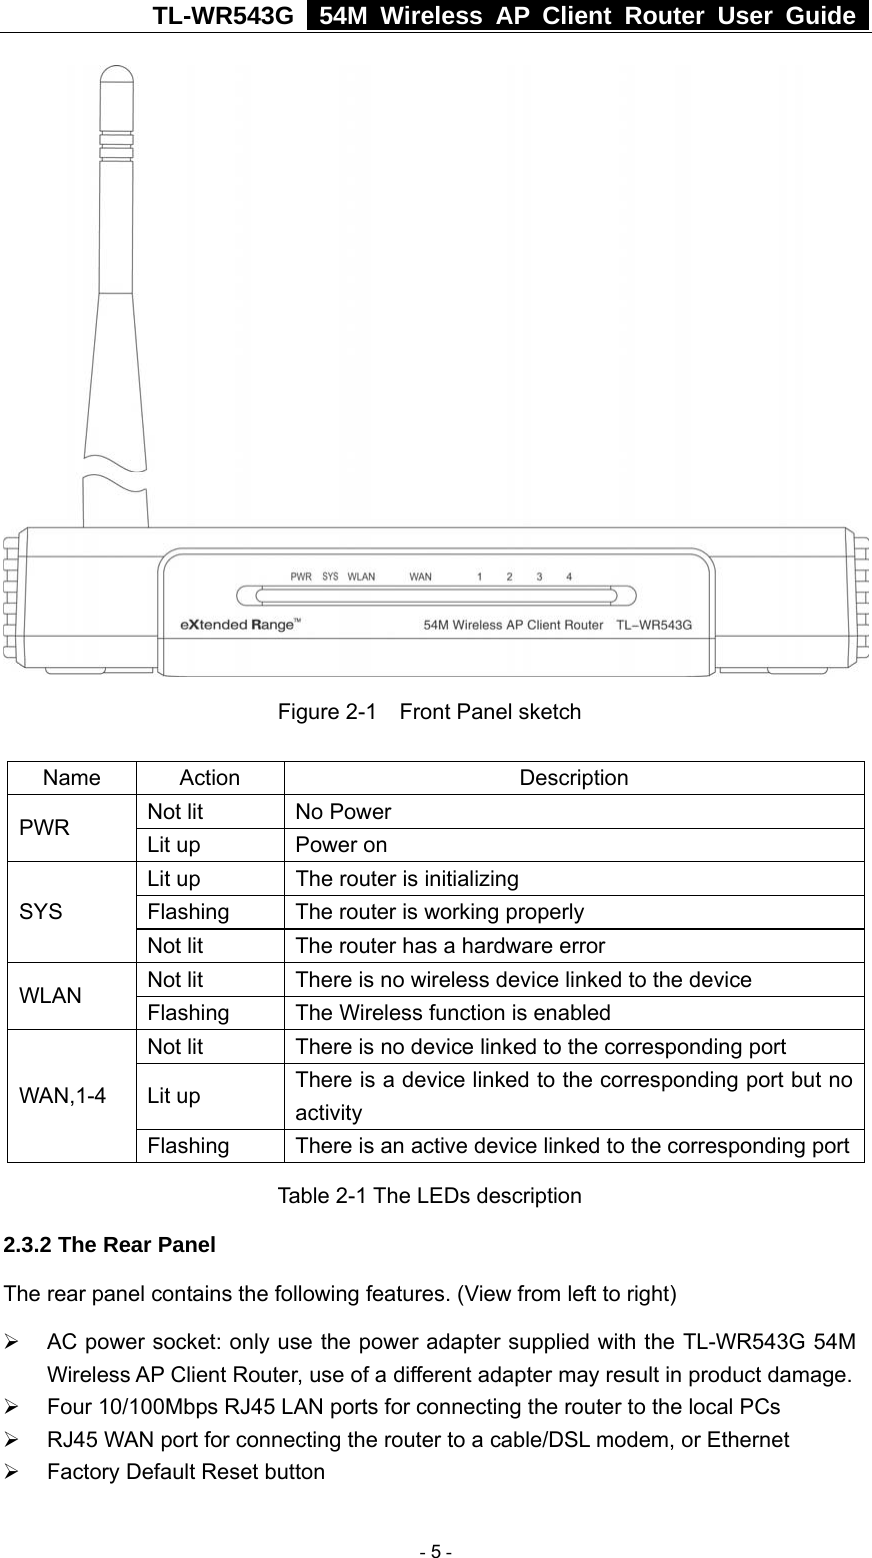 TL-WR543G   54M Wireless AP Client Router User Guide   Figure 2-1    Front Panel sketch  Name Action  Description Not lit  No Power PWR  Lit up  Power on Lit up  The router is initializing Flashing  The router is working properly SYS Not lit  The router has a hardware error Not lit  There is no wireless device linked to the device WLAN  Flashing  The Wireless function is enabled Not lit  There is no device linked to the corresponding port Lit up  There is a device linked to the corresponding port but no activity WAN,1-4 Flashing  There is an active device linked to the corresponding portTable 2-1 The LEDs description 2.3.2 The Rear Panel The rear panel contains the following features. (View from left to right) ¾  AC power socket: only use the power adapter supplied with the TL-WR543G 54M Wireless AP Client Router, use of a different adapter may result in product damage. ¾  Four 10/100Mbps RJ45 LAN ports for connecting the router to the local PCs ¾  RJ45 WAN port for connecting the router to a cable/DSL modem, or Ethernet   ¾  Factory Default Reset button  - 5 - 